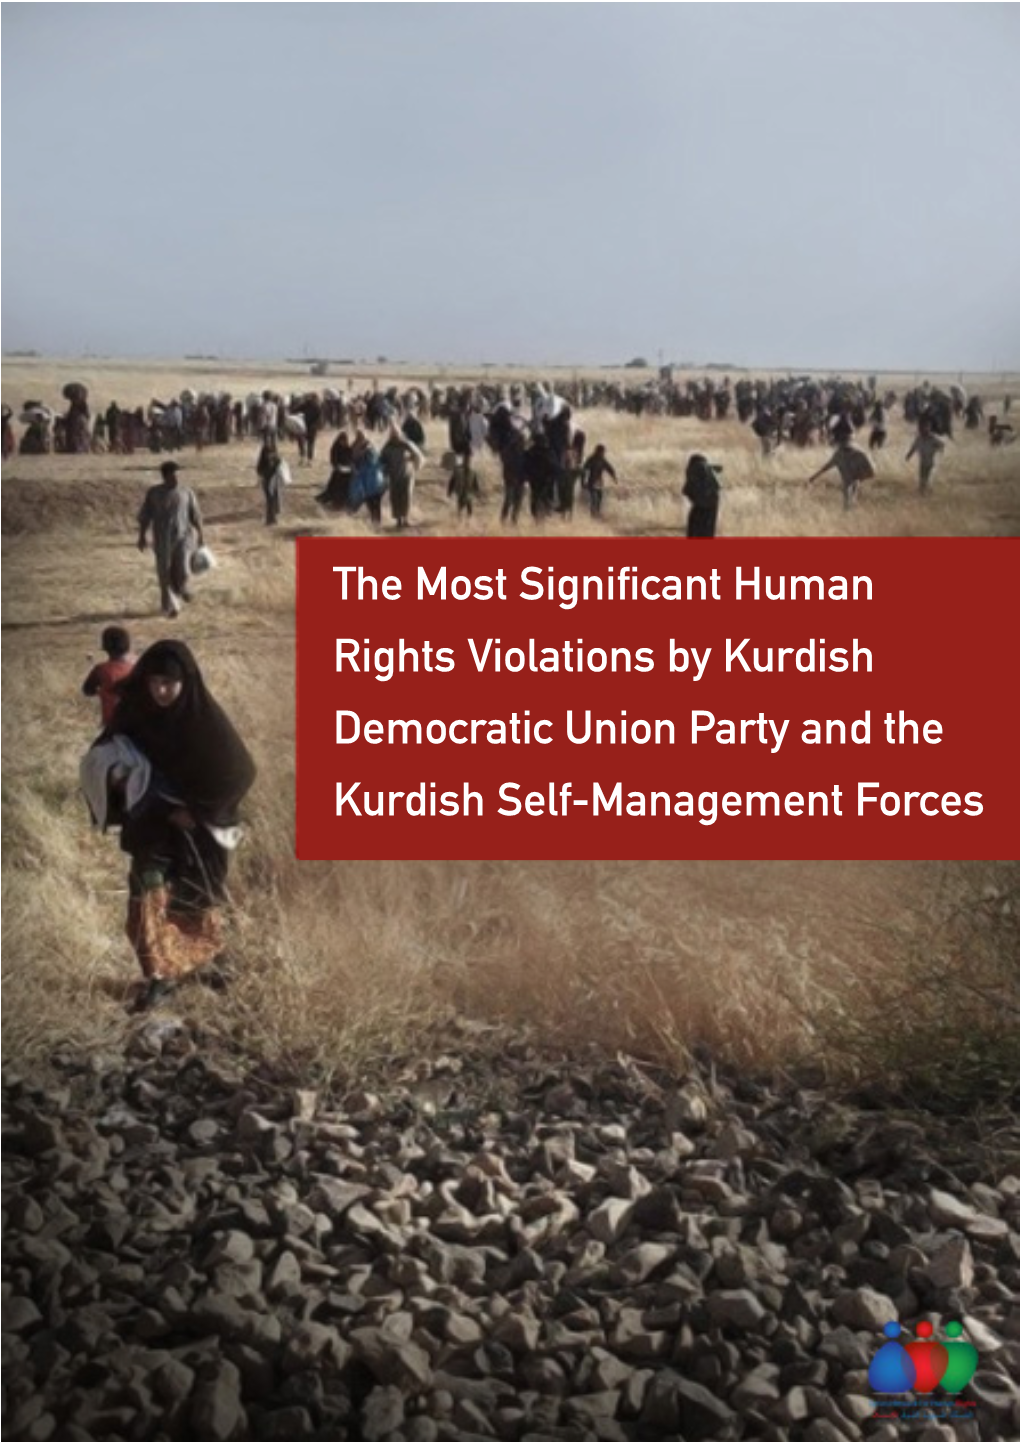 The Most Significant Human Rights Violations by Kurdish Democratic Union Party and the Kurdish Self-Management Forces